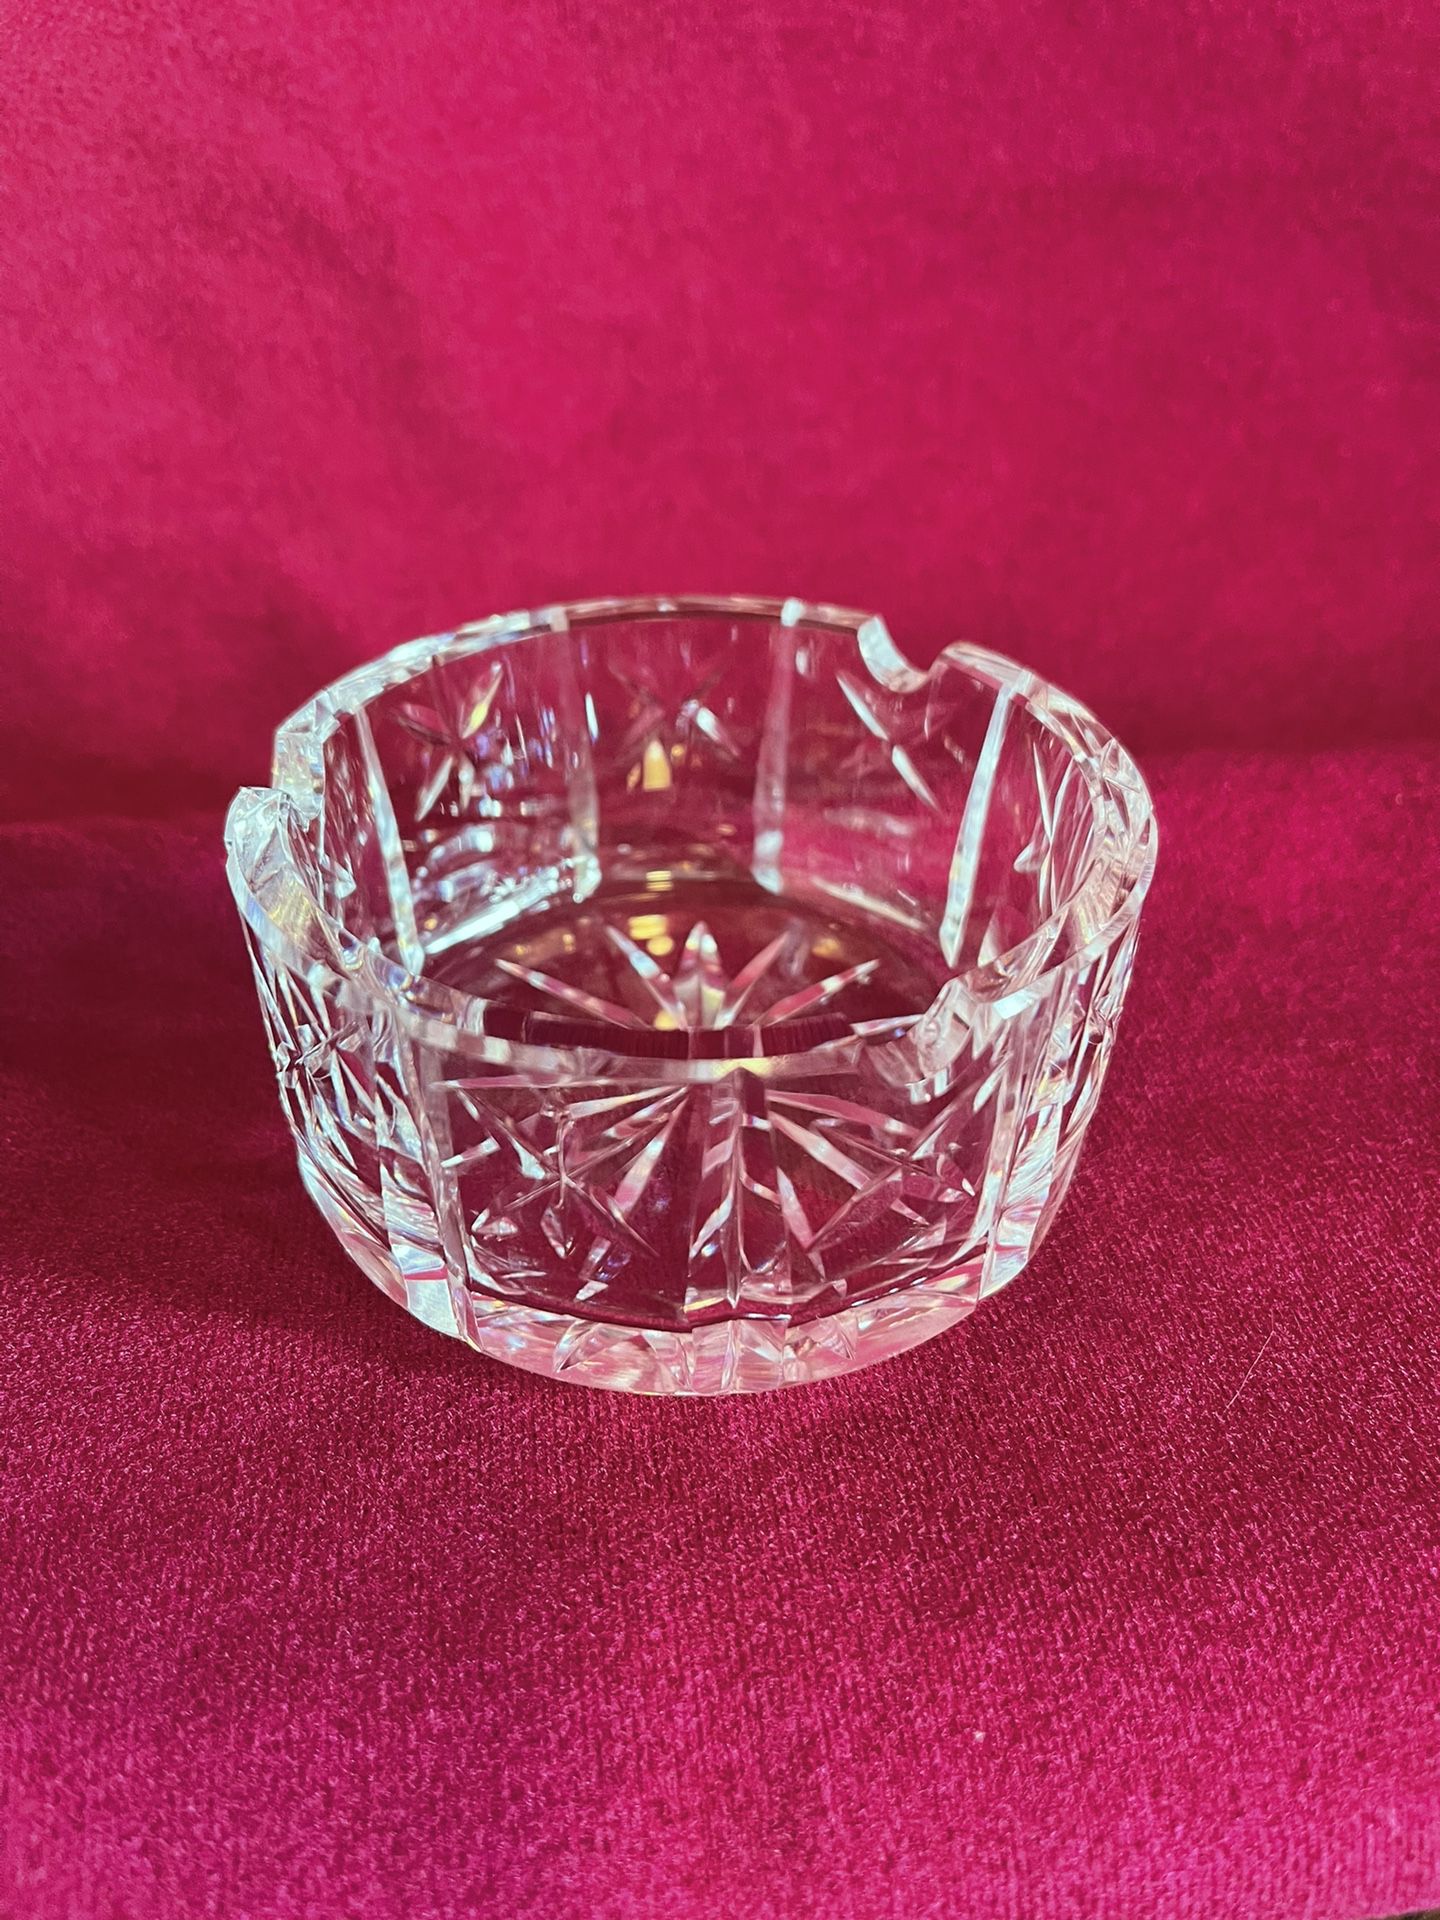 Waterford Crystal Ashtray Trinket Dish Cut Star Design Round Signed